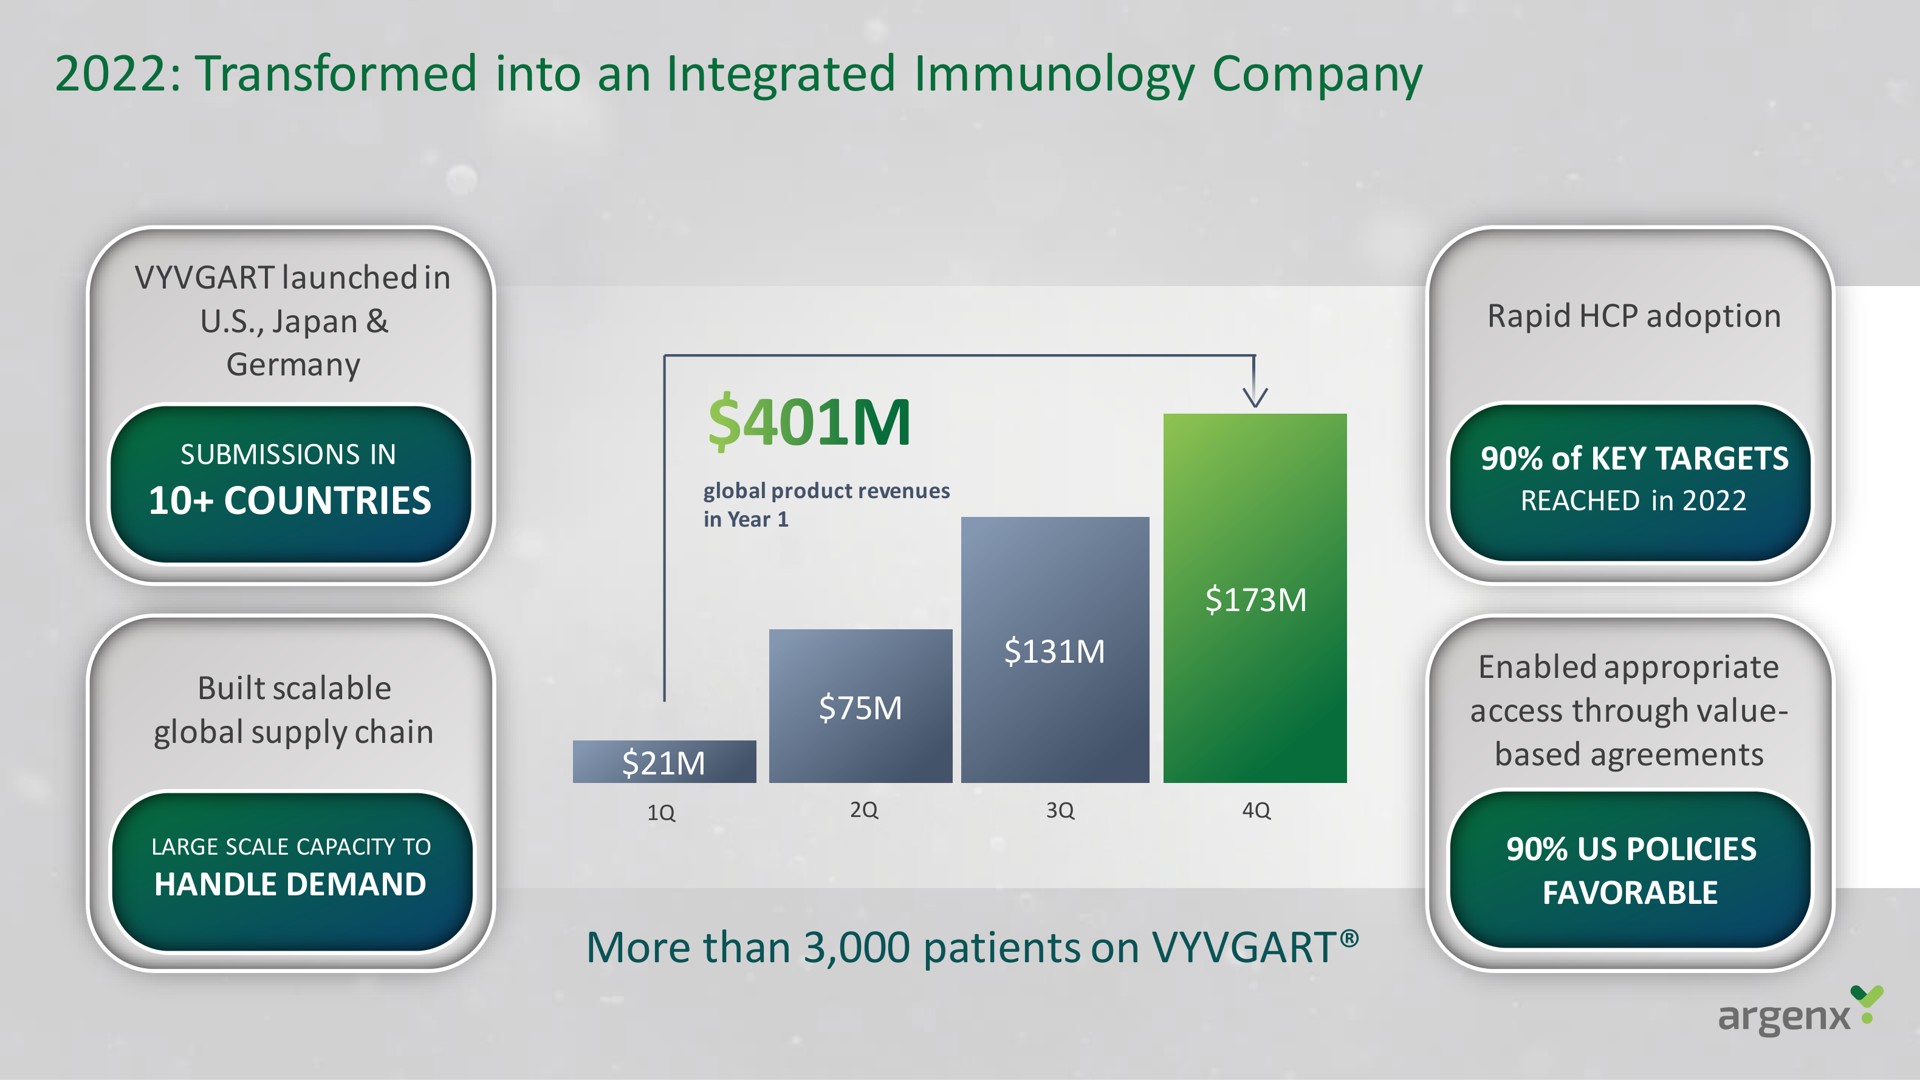 transformed into an integrated immunology company | argenx SE